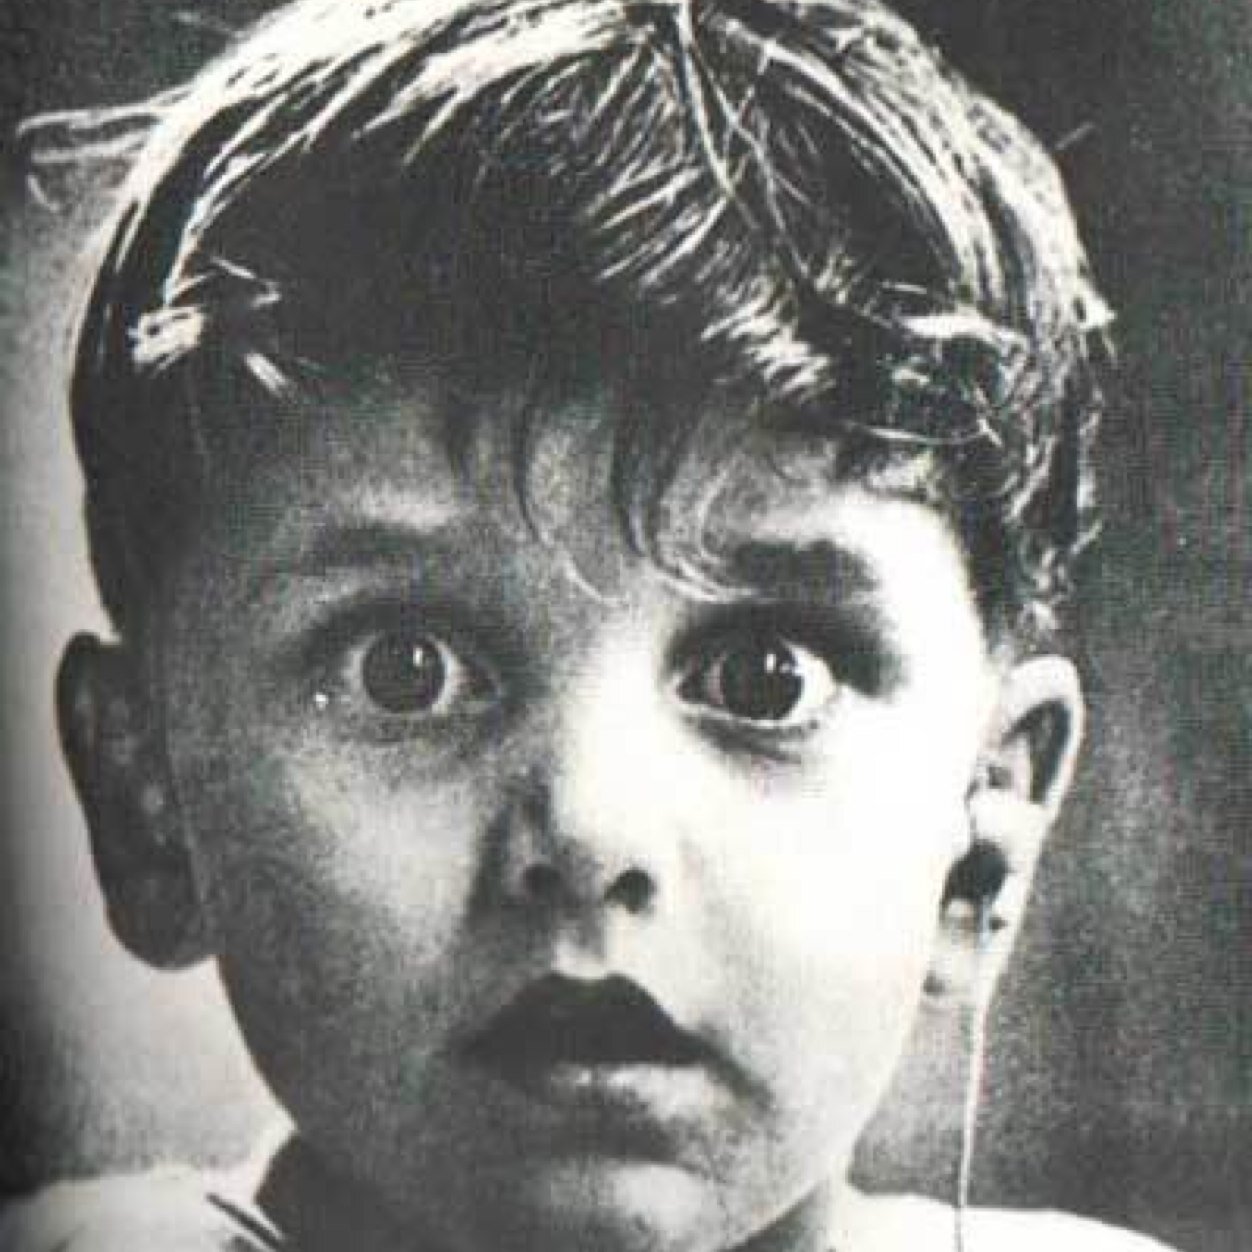 Harold Whittles hears for the first time ever after a doctor places an earpiece in his left ear.This photo was taken by photographer Jack Bradley, and depicts the exact moment when this boy,hears for the very first time ever.